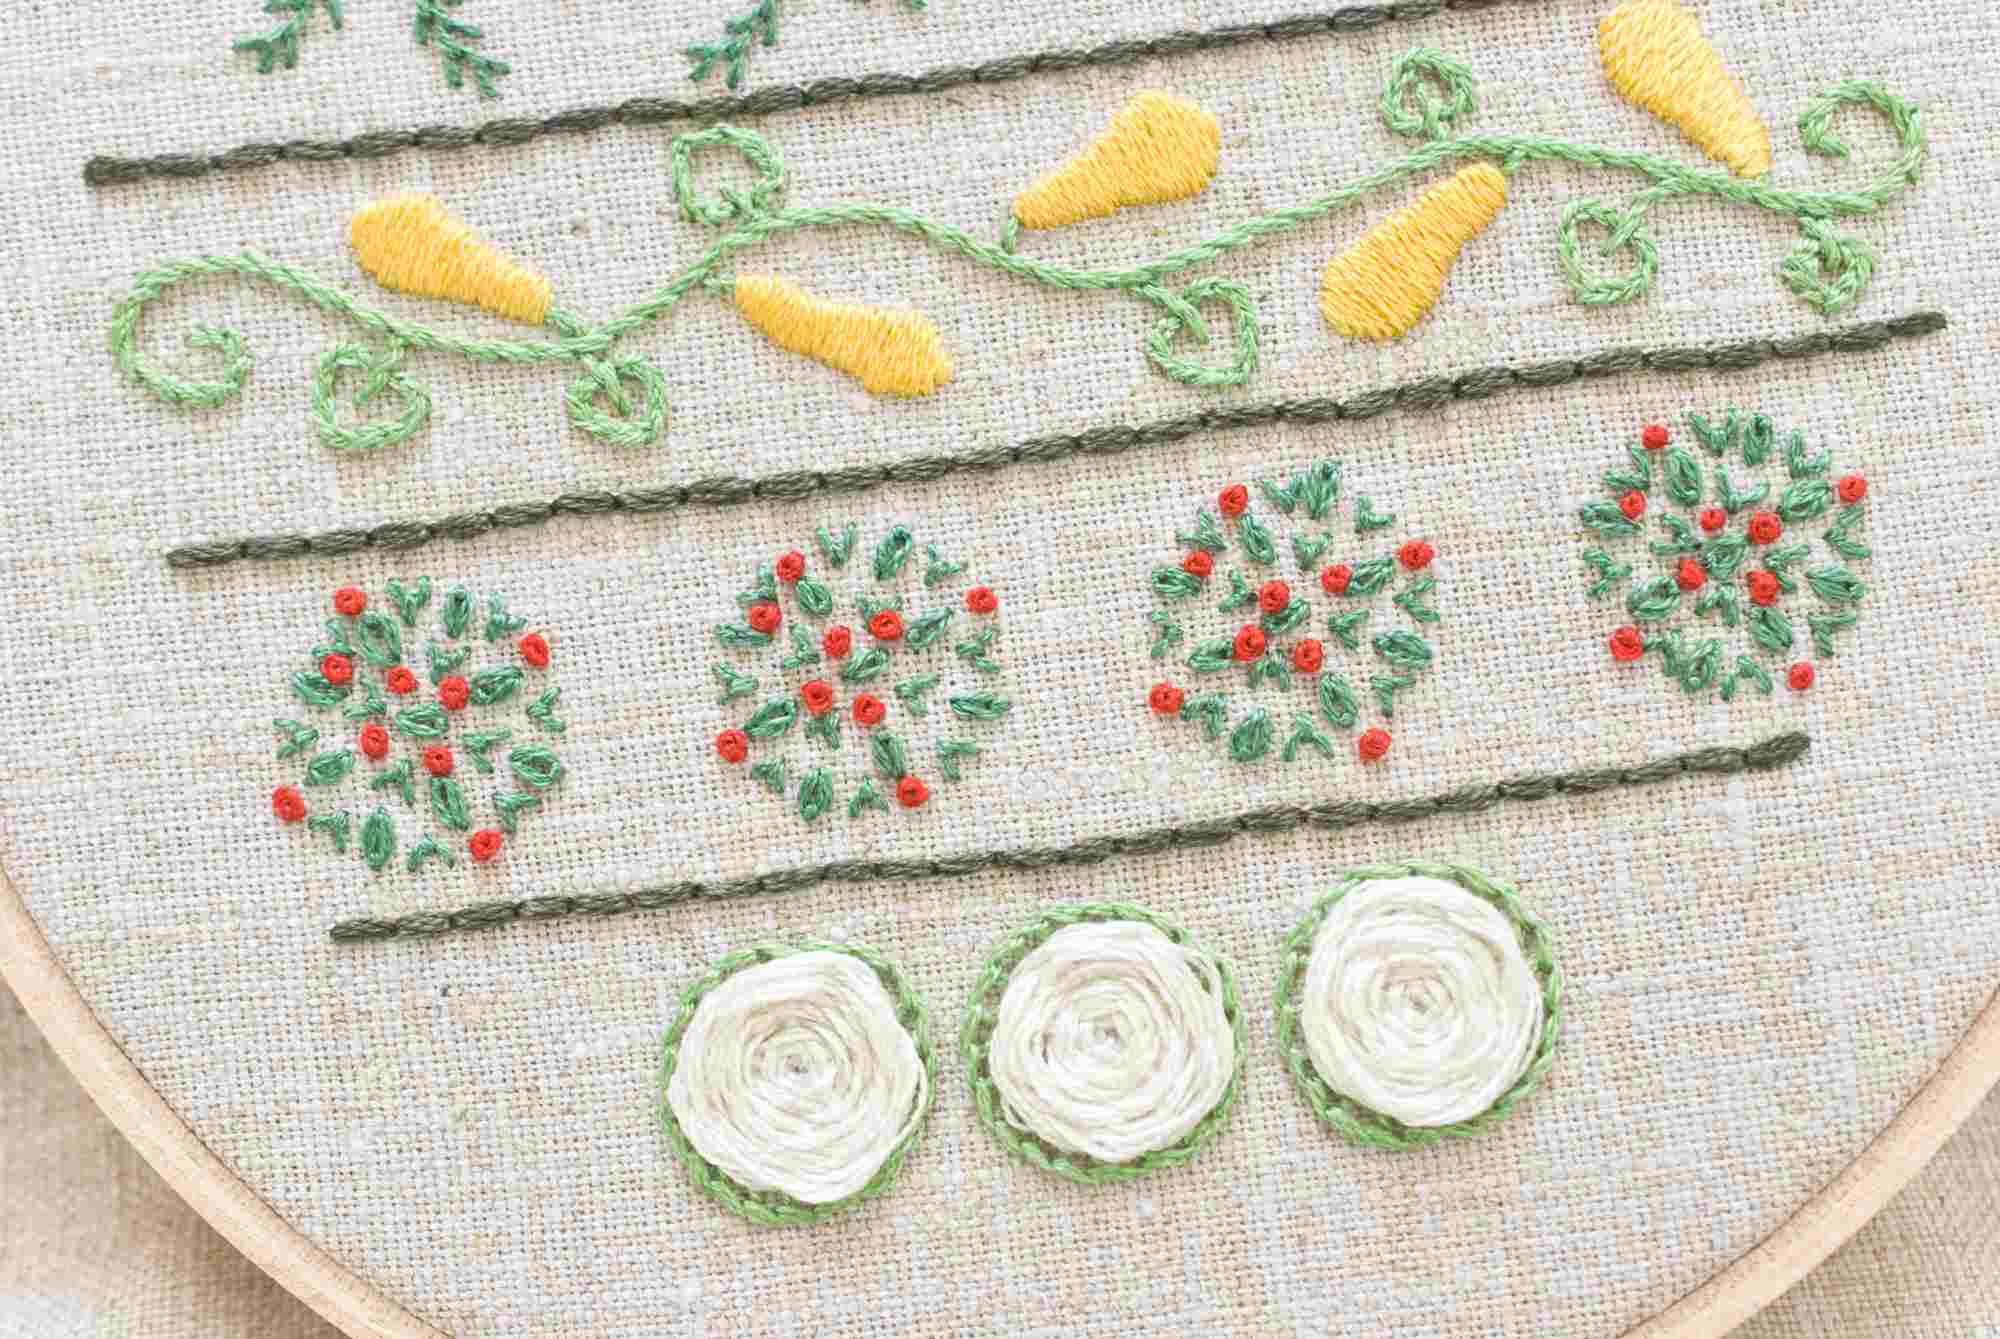 Herb Embroidery Patterns Vegetable Garden Embroidery Sampler Pattern